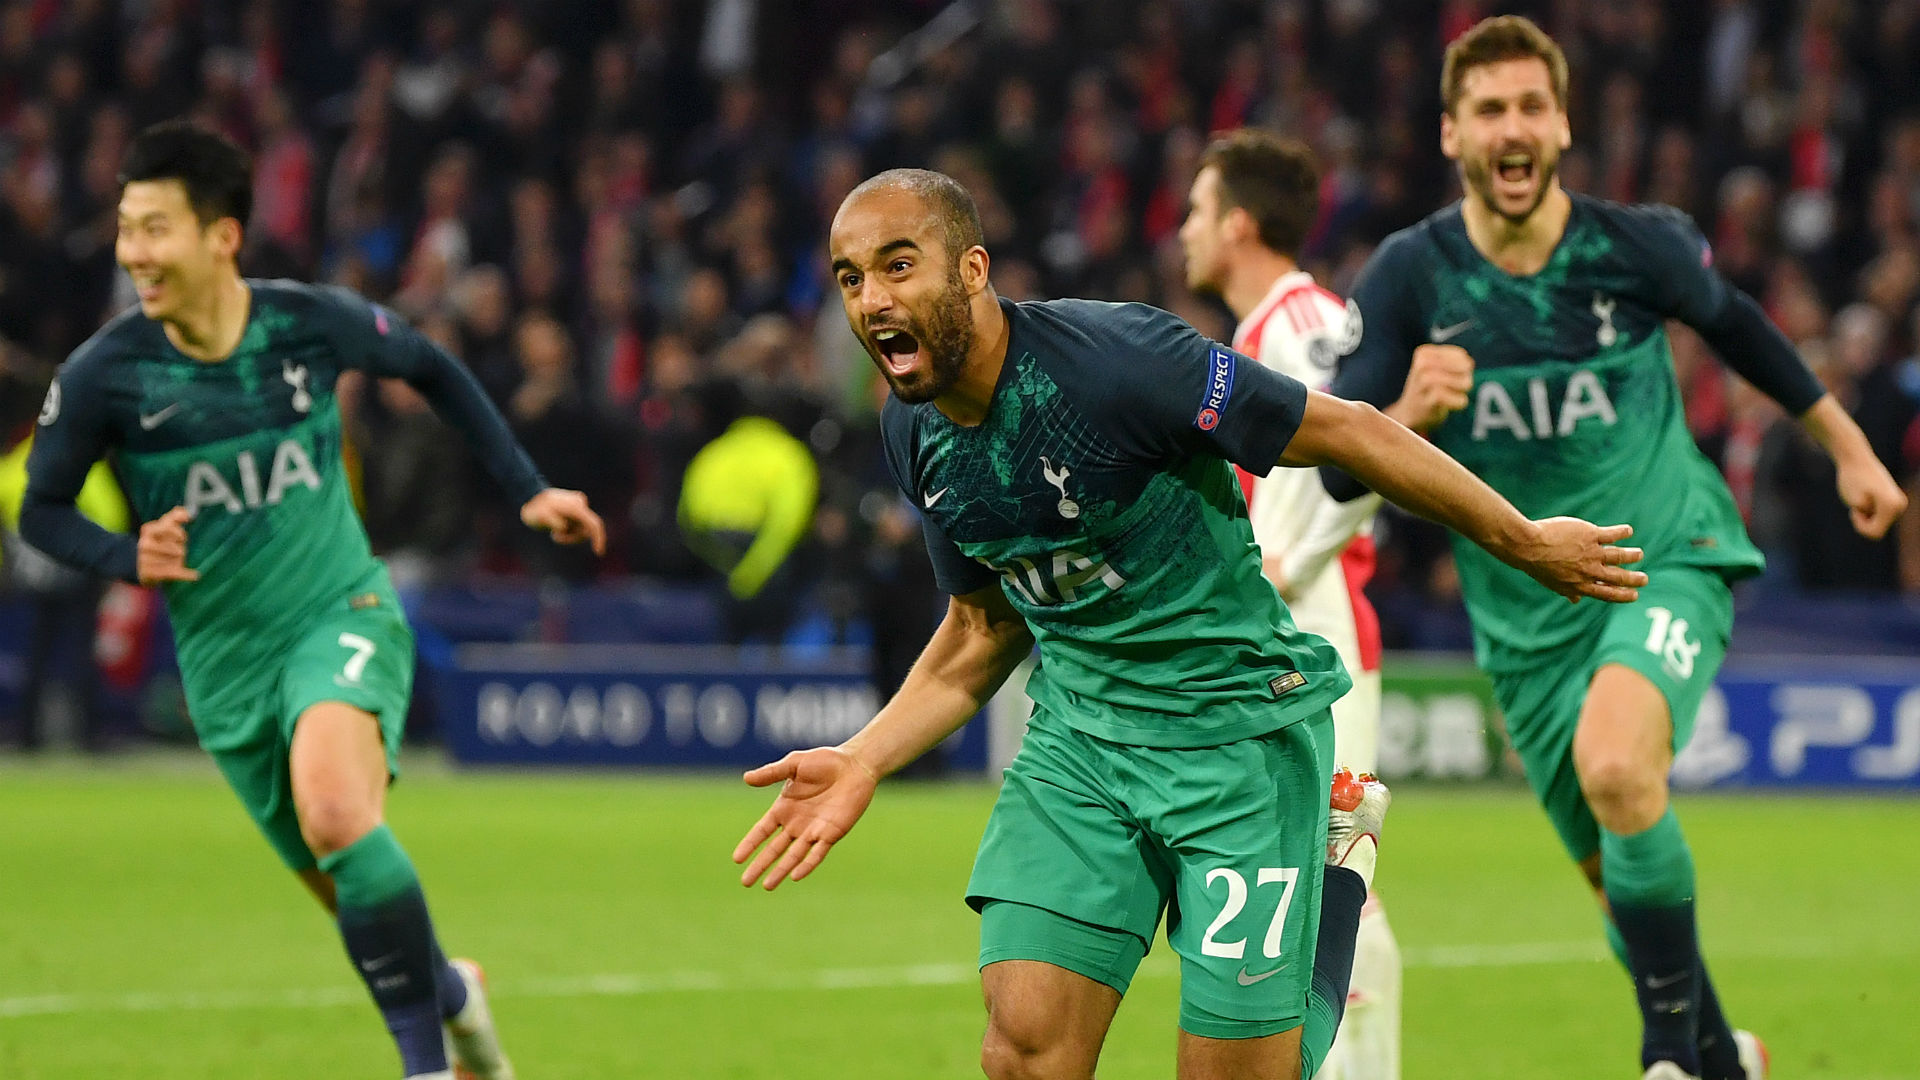 Ajax vs. Tottenham results: Spurs pull off miracle win in final seconds of Champions League ...